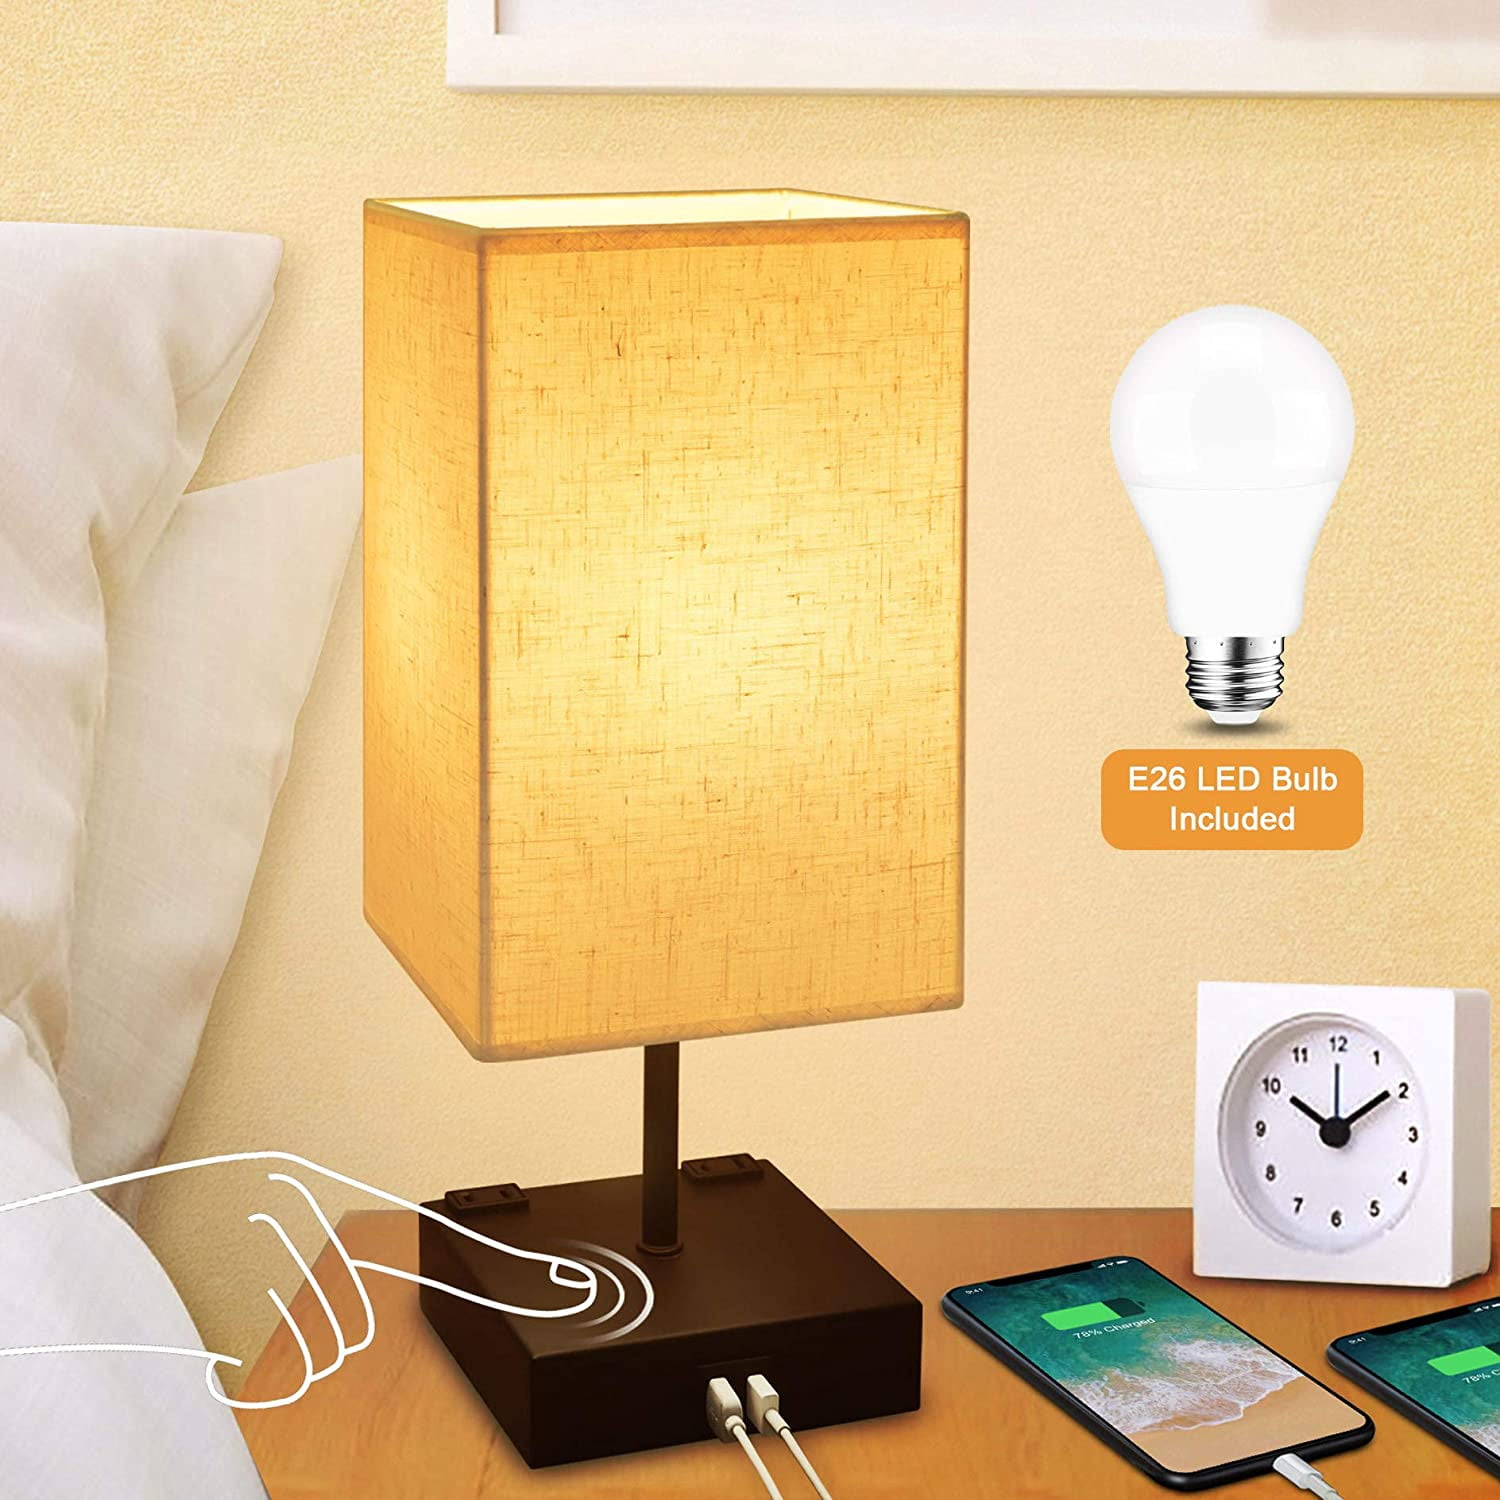 Small Lamps for Nightstand End Table Bedrooms & Living Room LED Bulb Included Black Fabric Lampshade Touch Control Bedside Lamp Black Sailstar 3 Way Dimmable Table Lamp with 2 USB and 2 Outlet